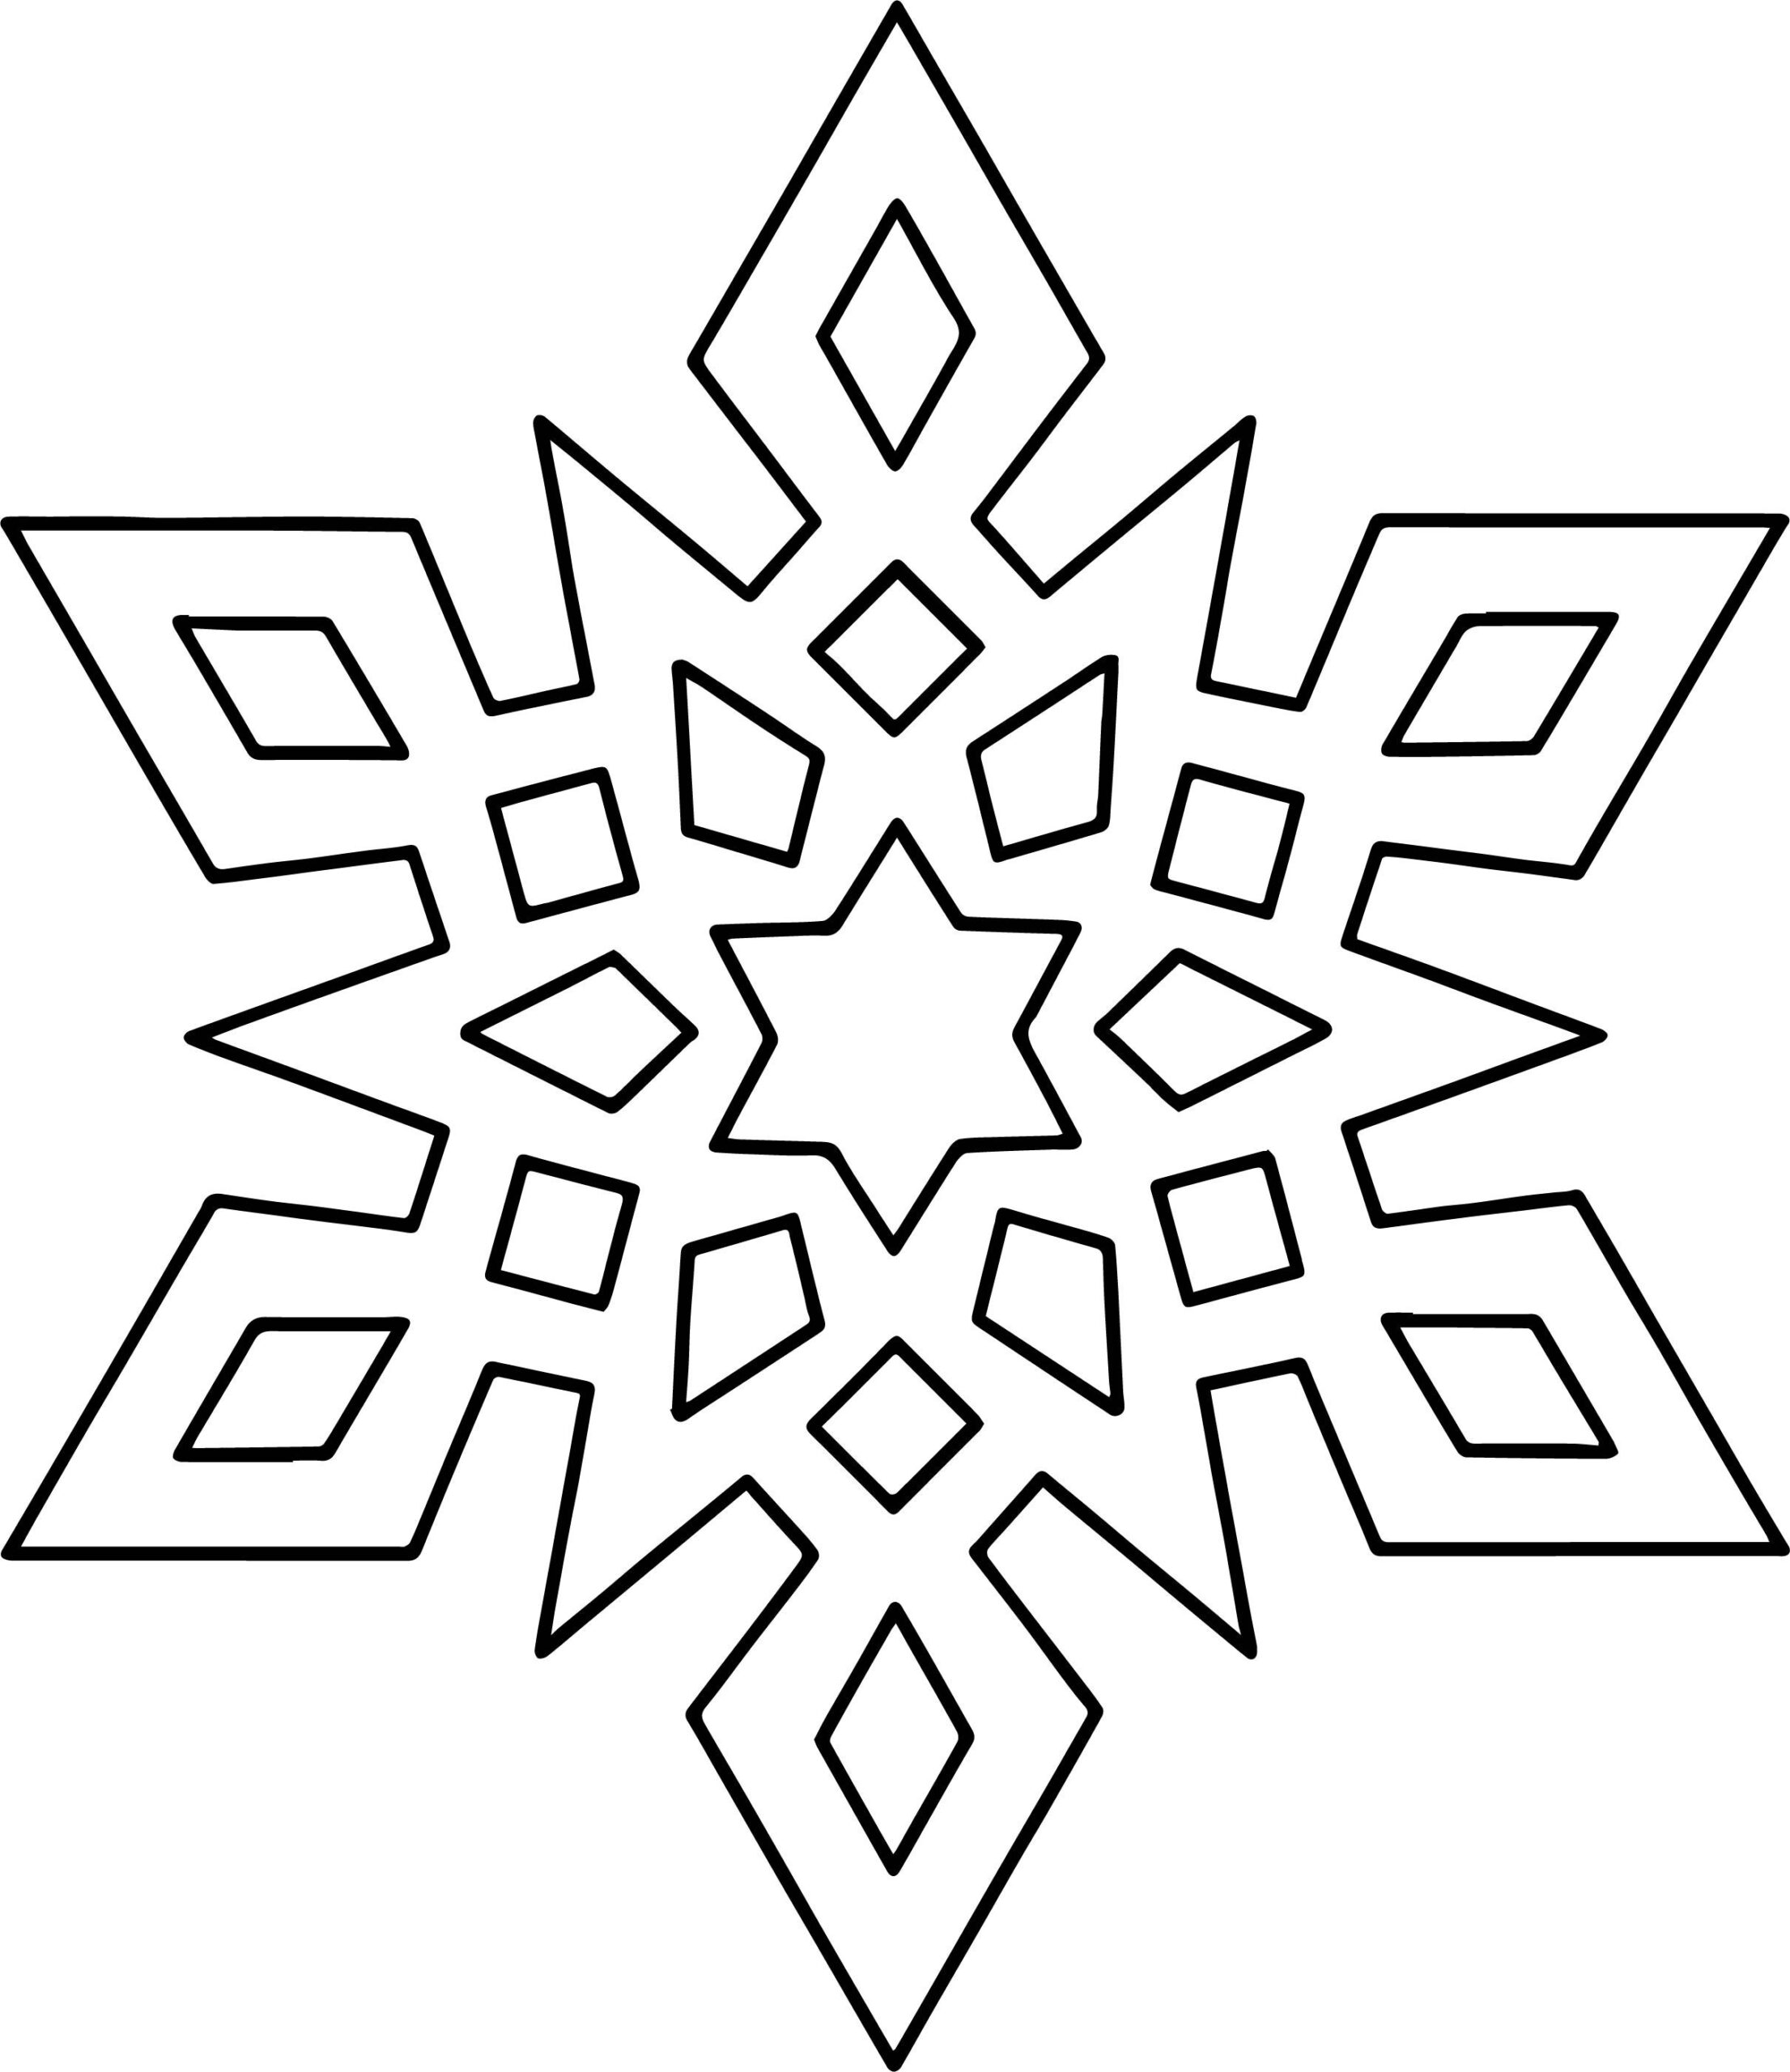 Coloring pages nice crystal snowflake coloring pages